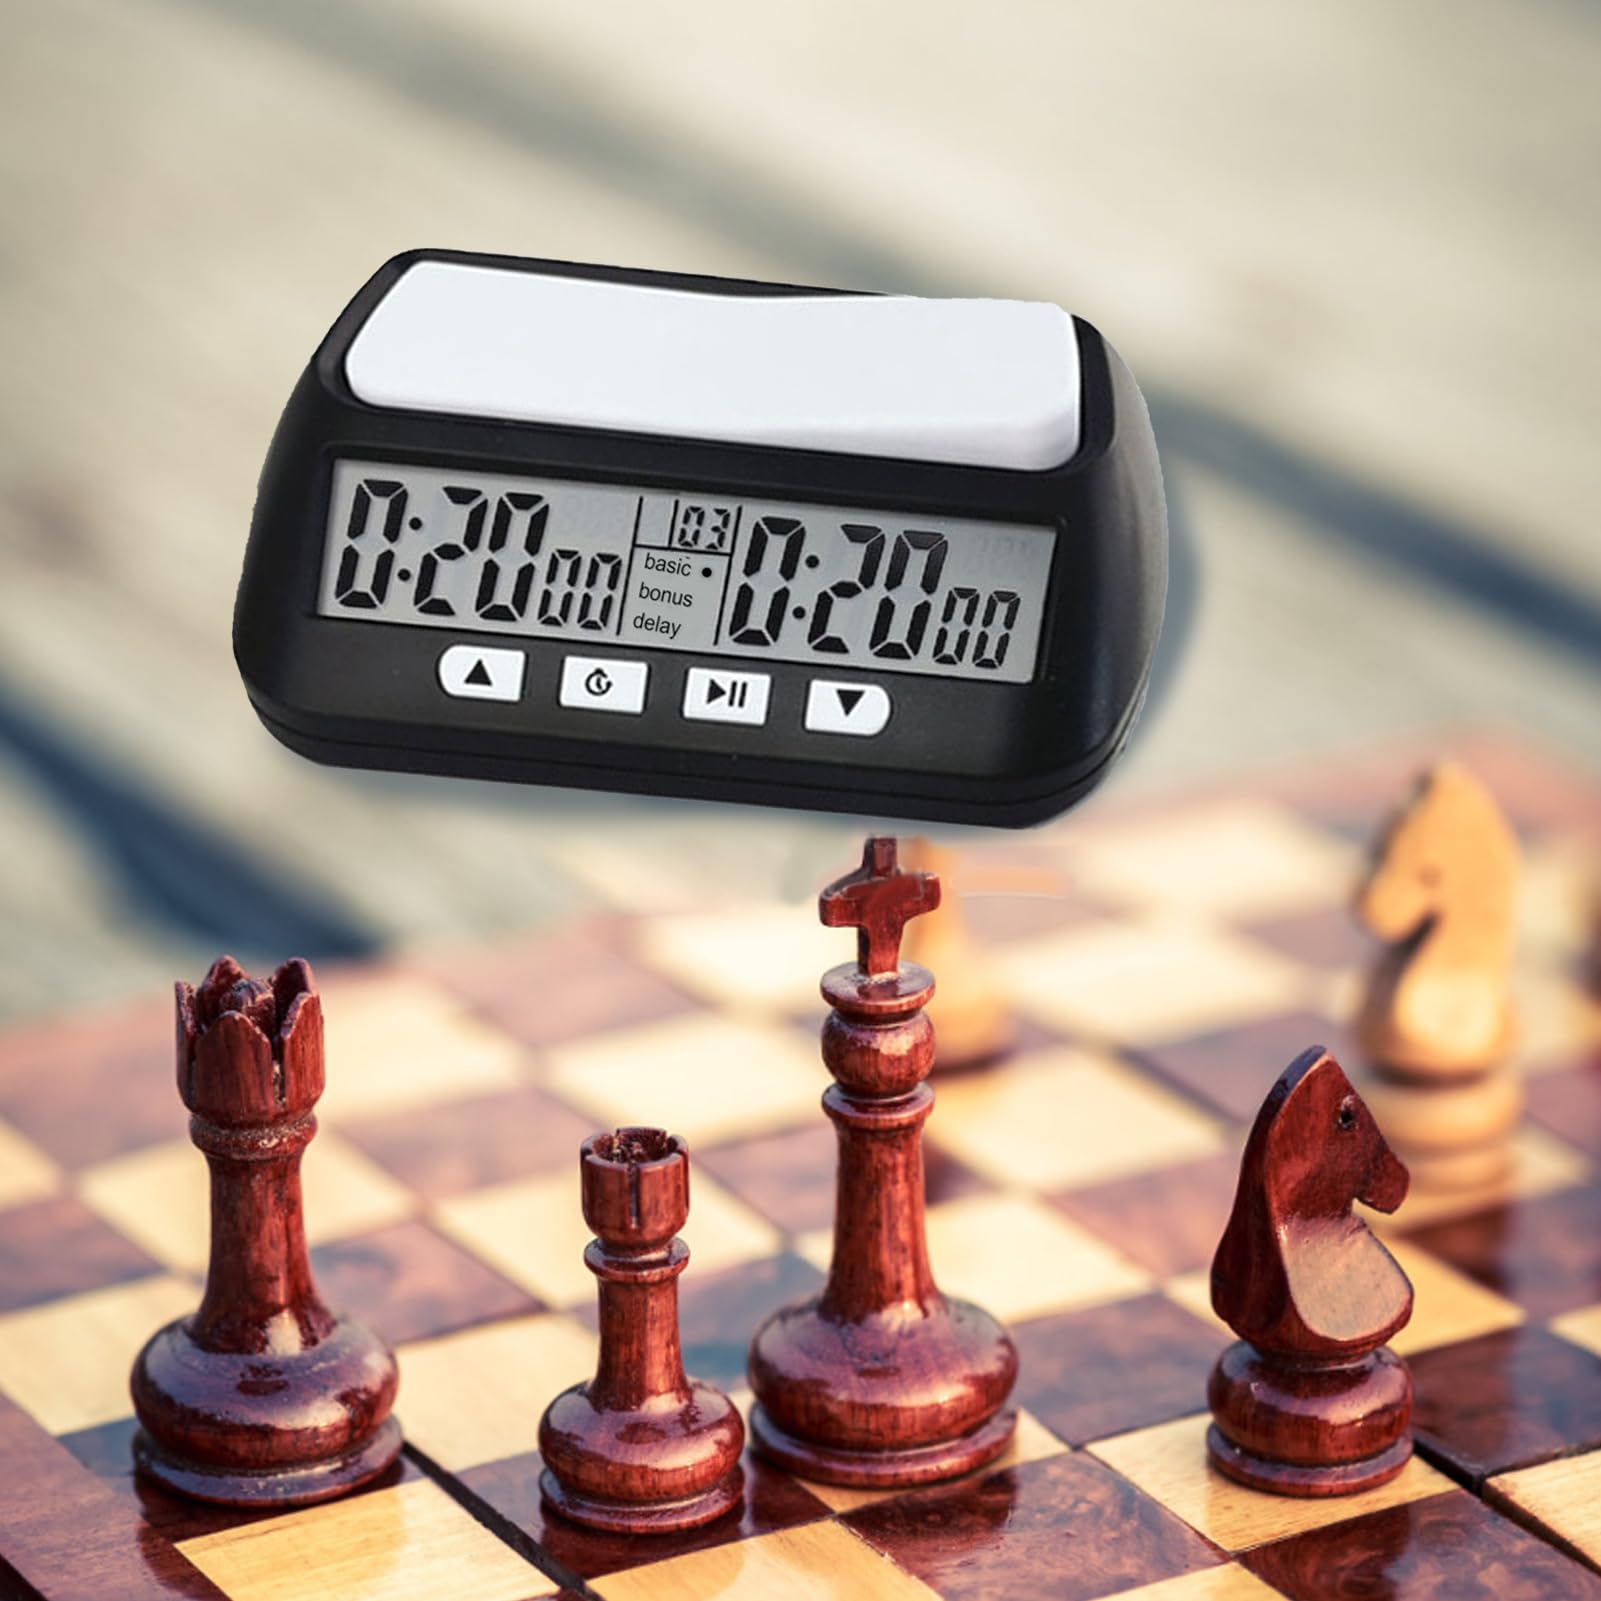 HEEPDD Chess Clock Digital Chess Timer, Portable Digital Chess Clock Game Timer with Basic Bonus Delay Alarm Function for Board Games